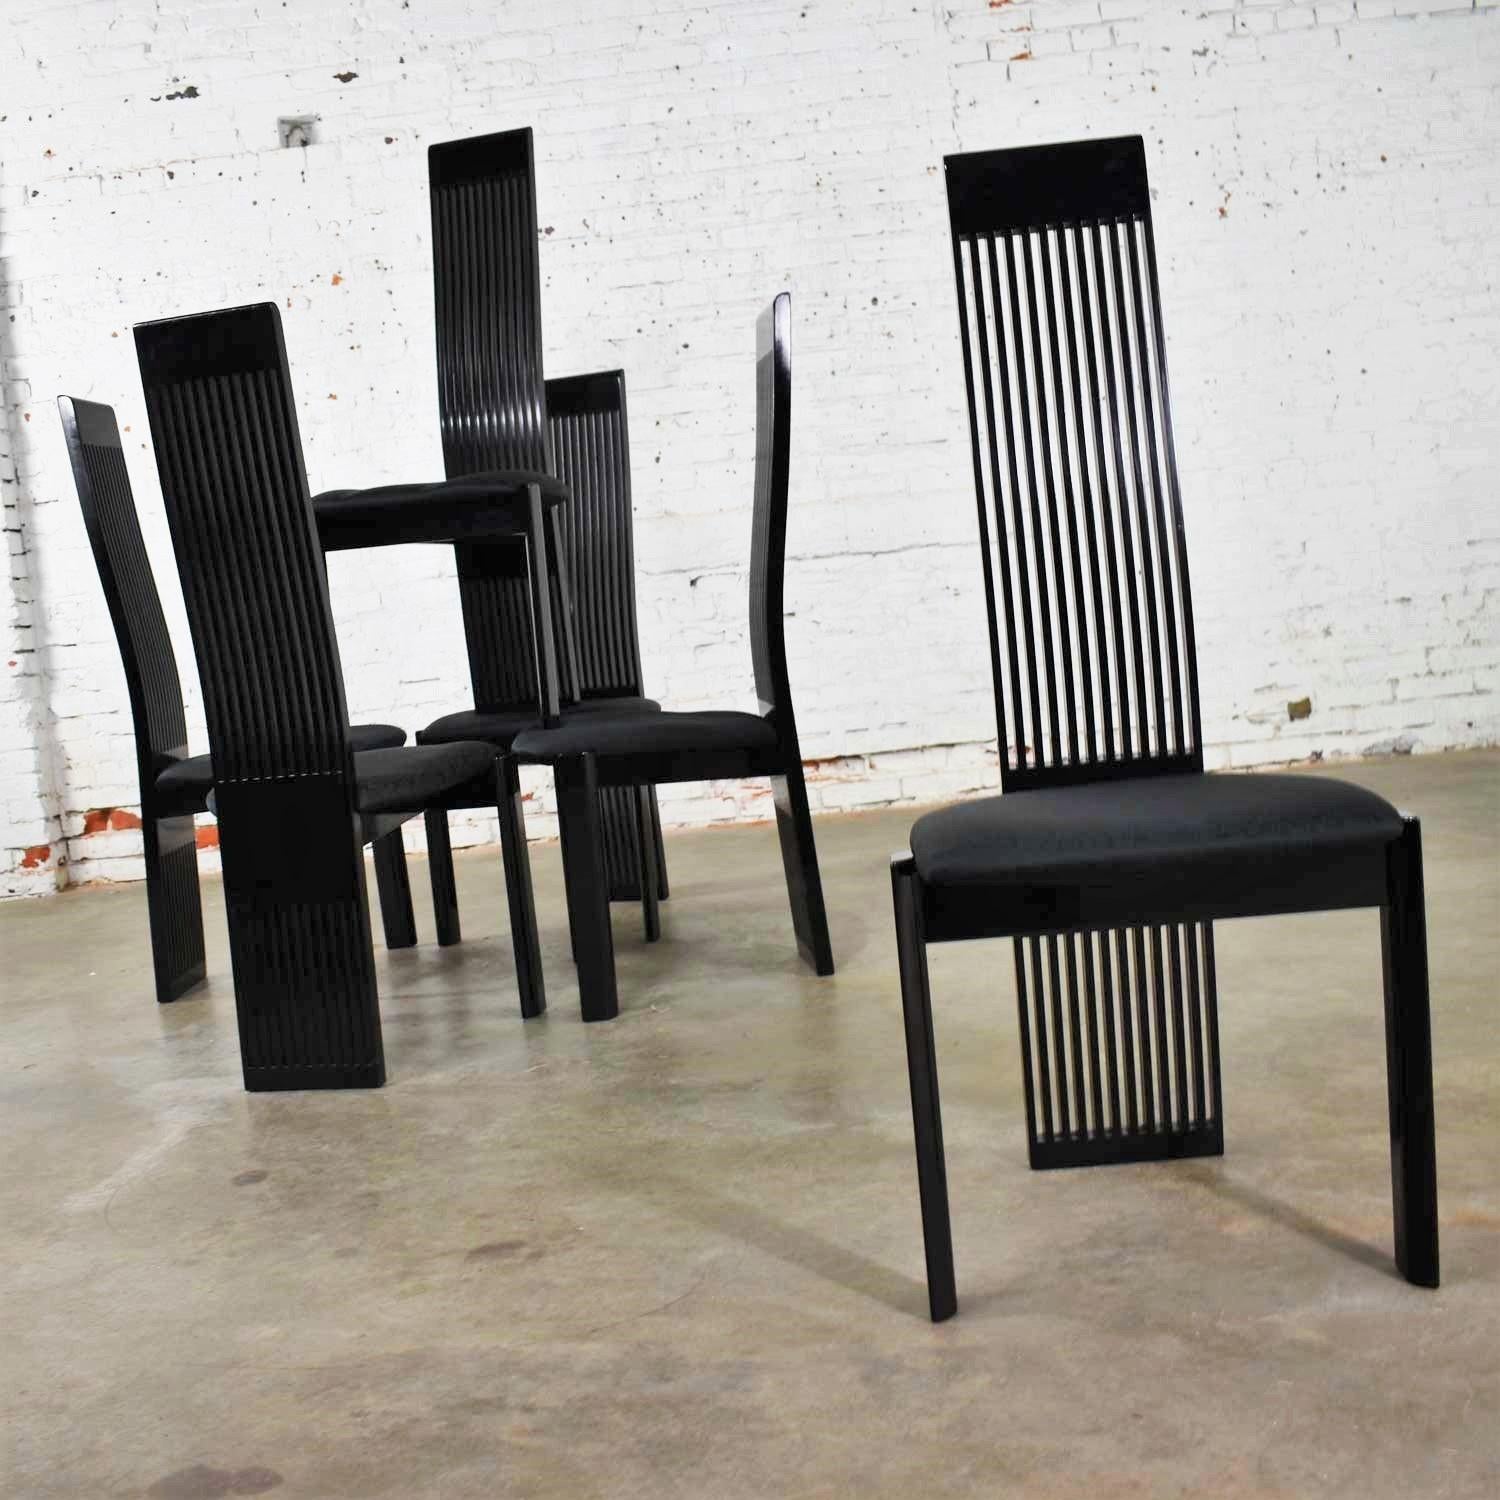 20th Century Six Tripod Postmodern Black Lacquer Dining Chairs by Pietro Costantini Made in